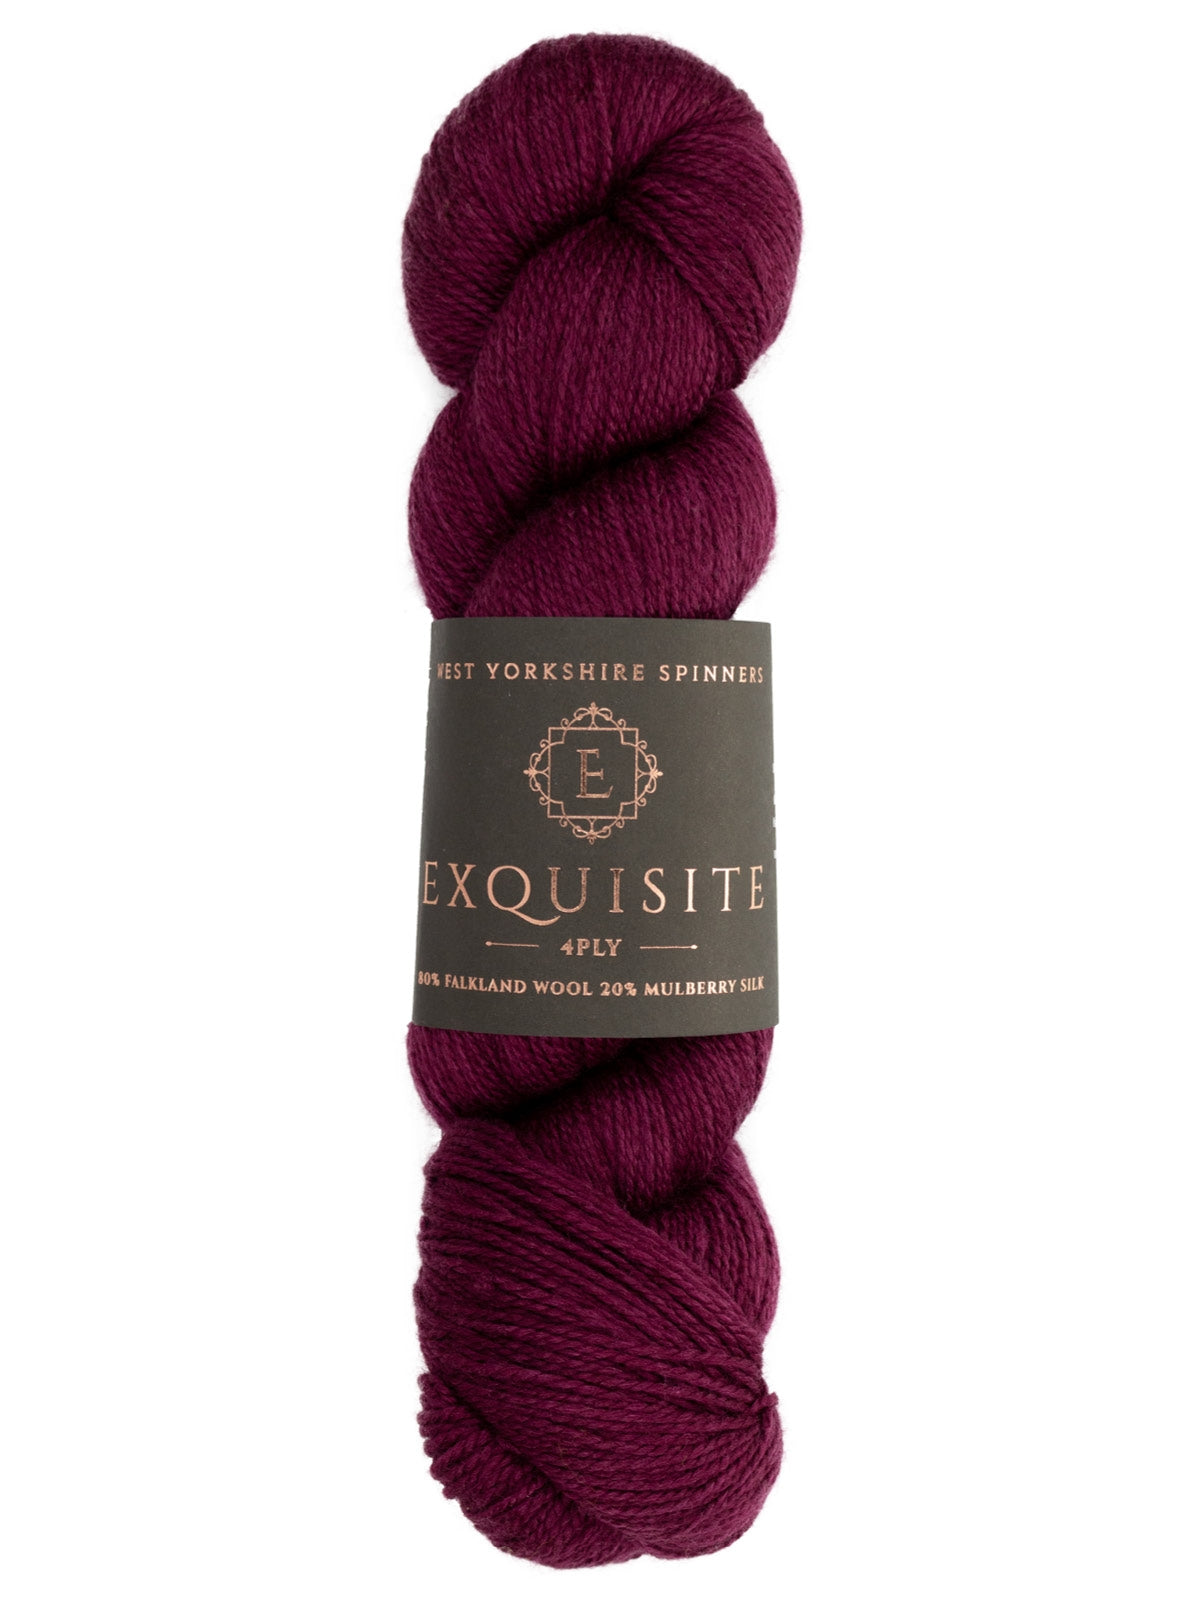 West Yorkshire Spinners Exquiste 4 ply Fingering yarn color red